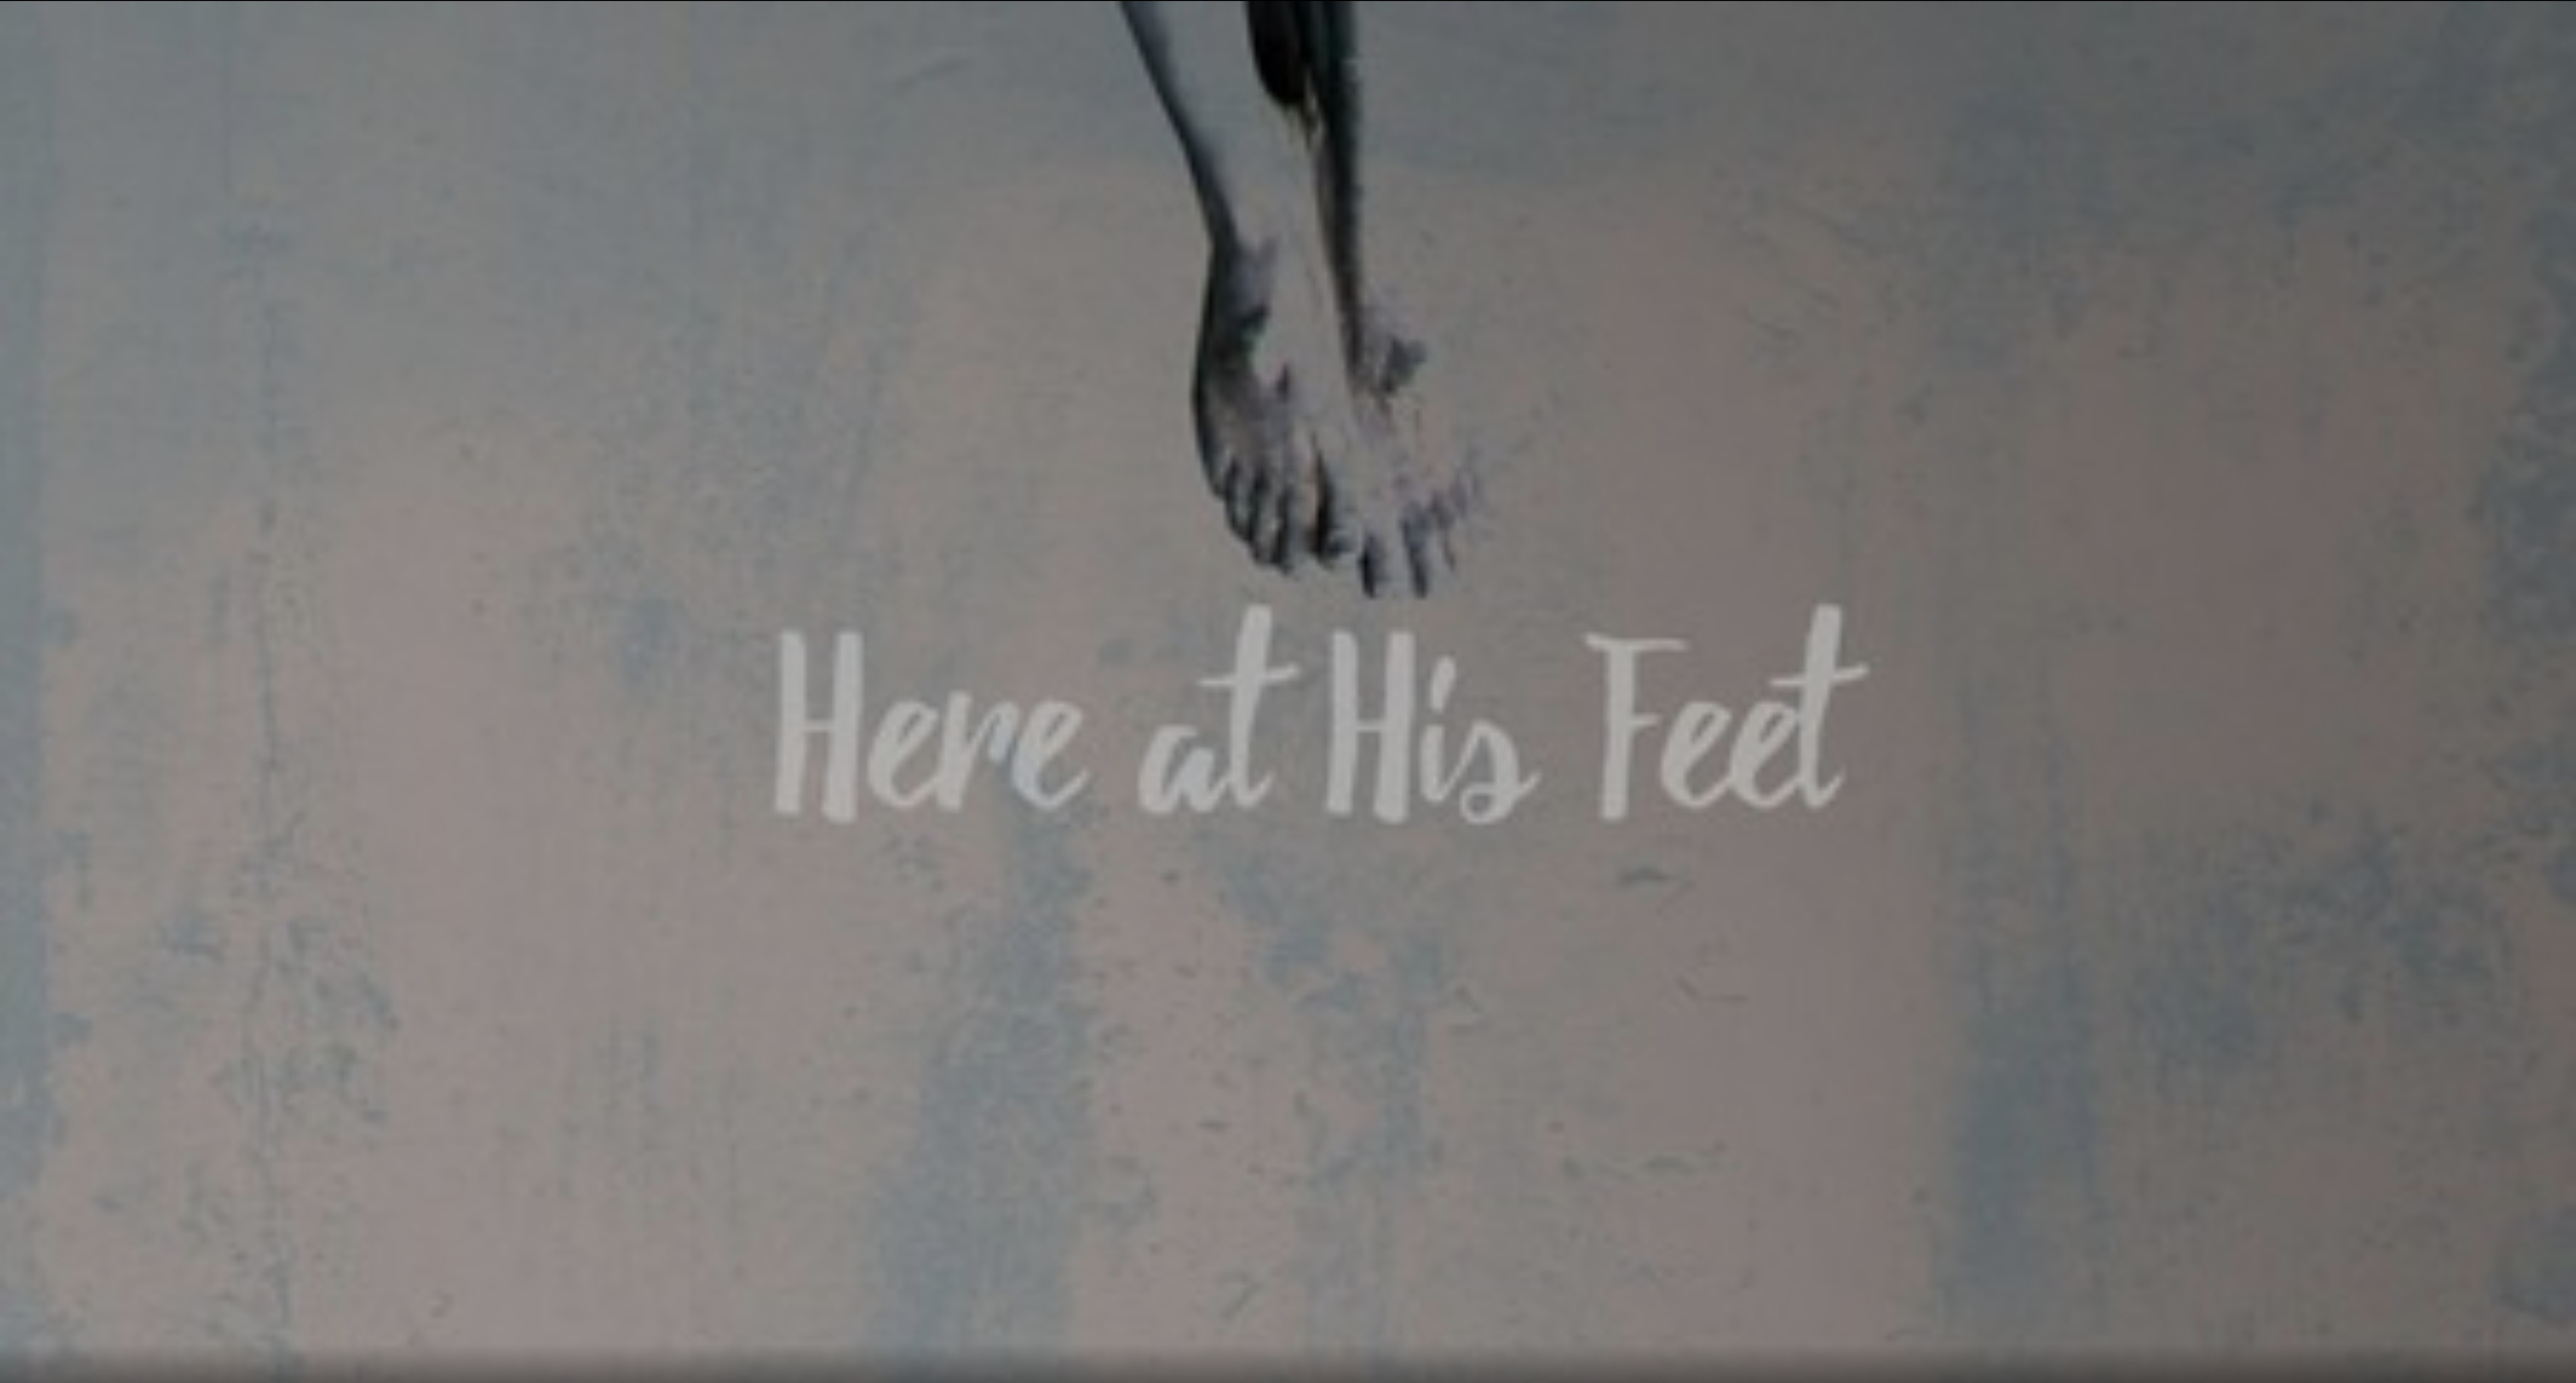 Here at His Feet